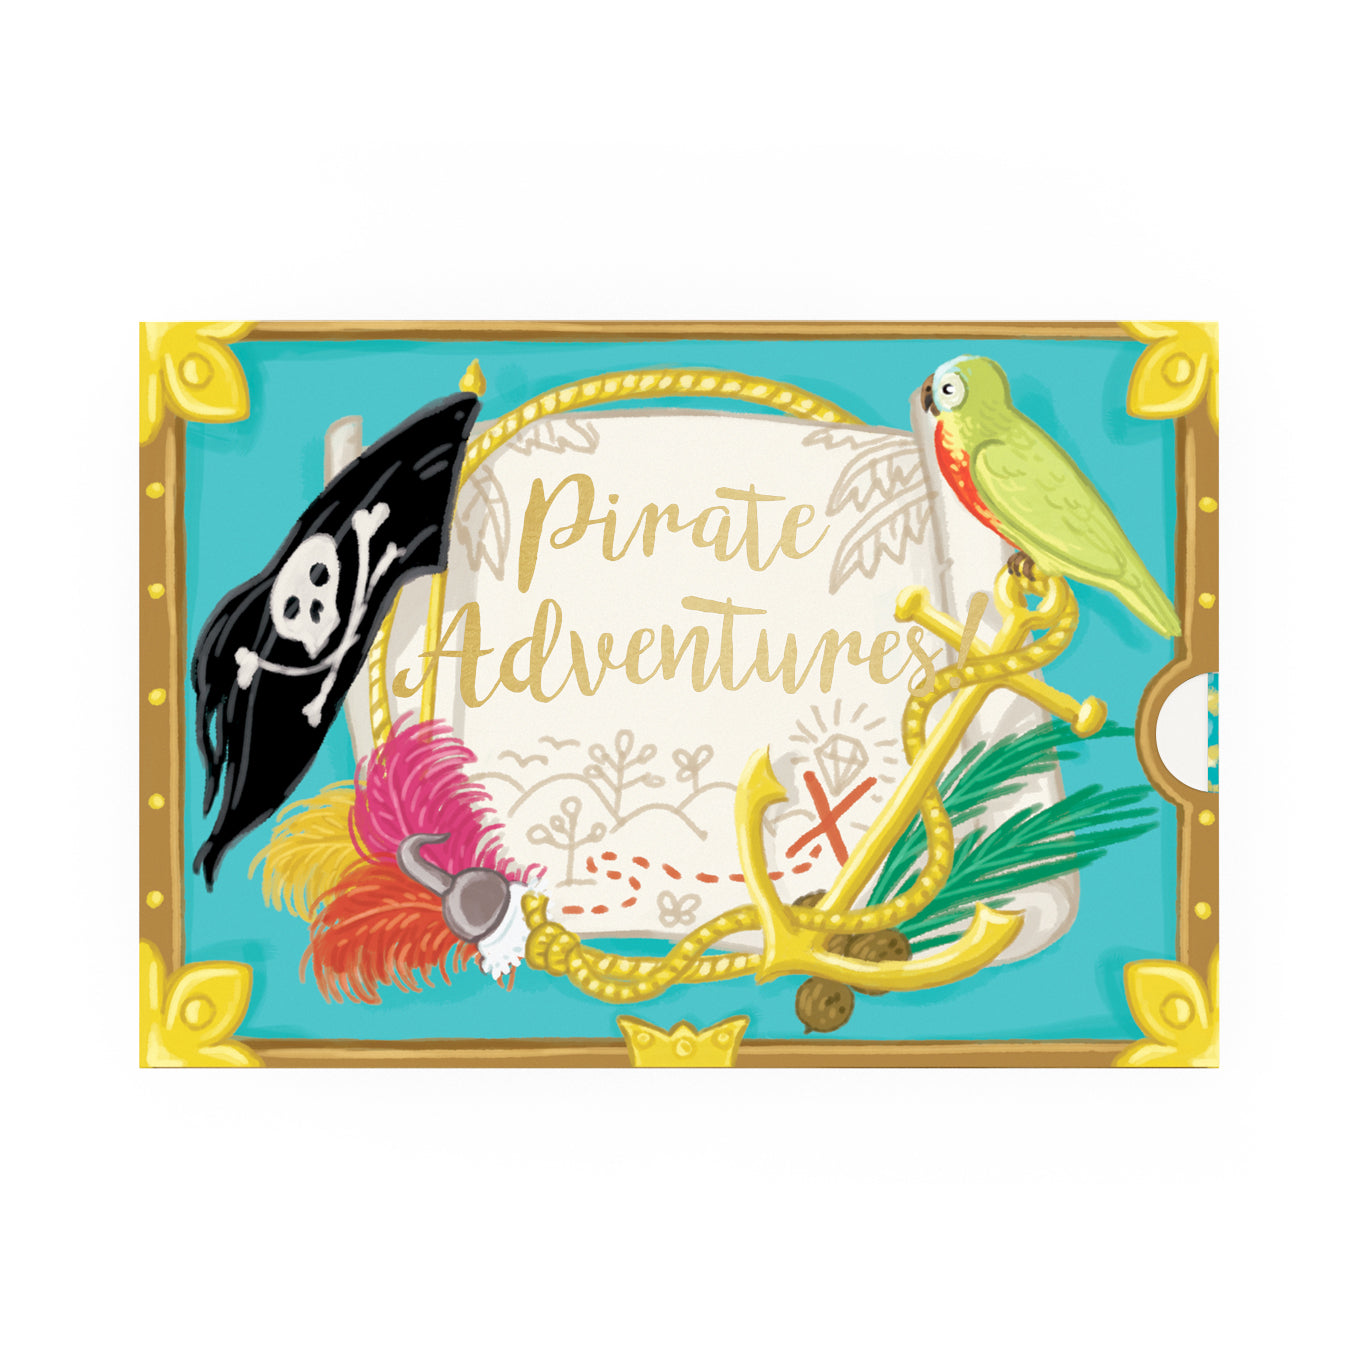 Pirate Adventures Music Box Card Novelty Dancing Musical Greeting Card